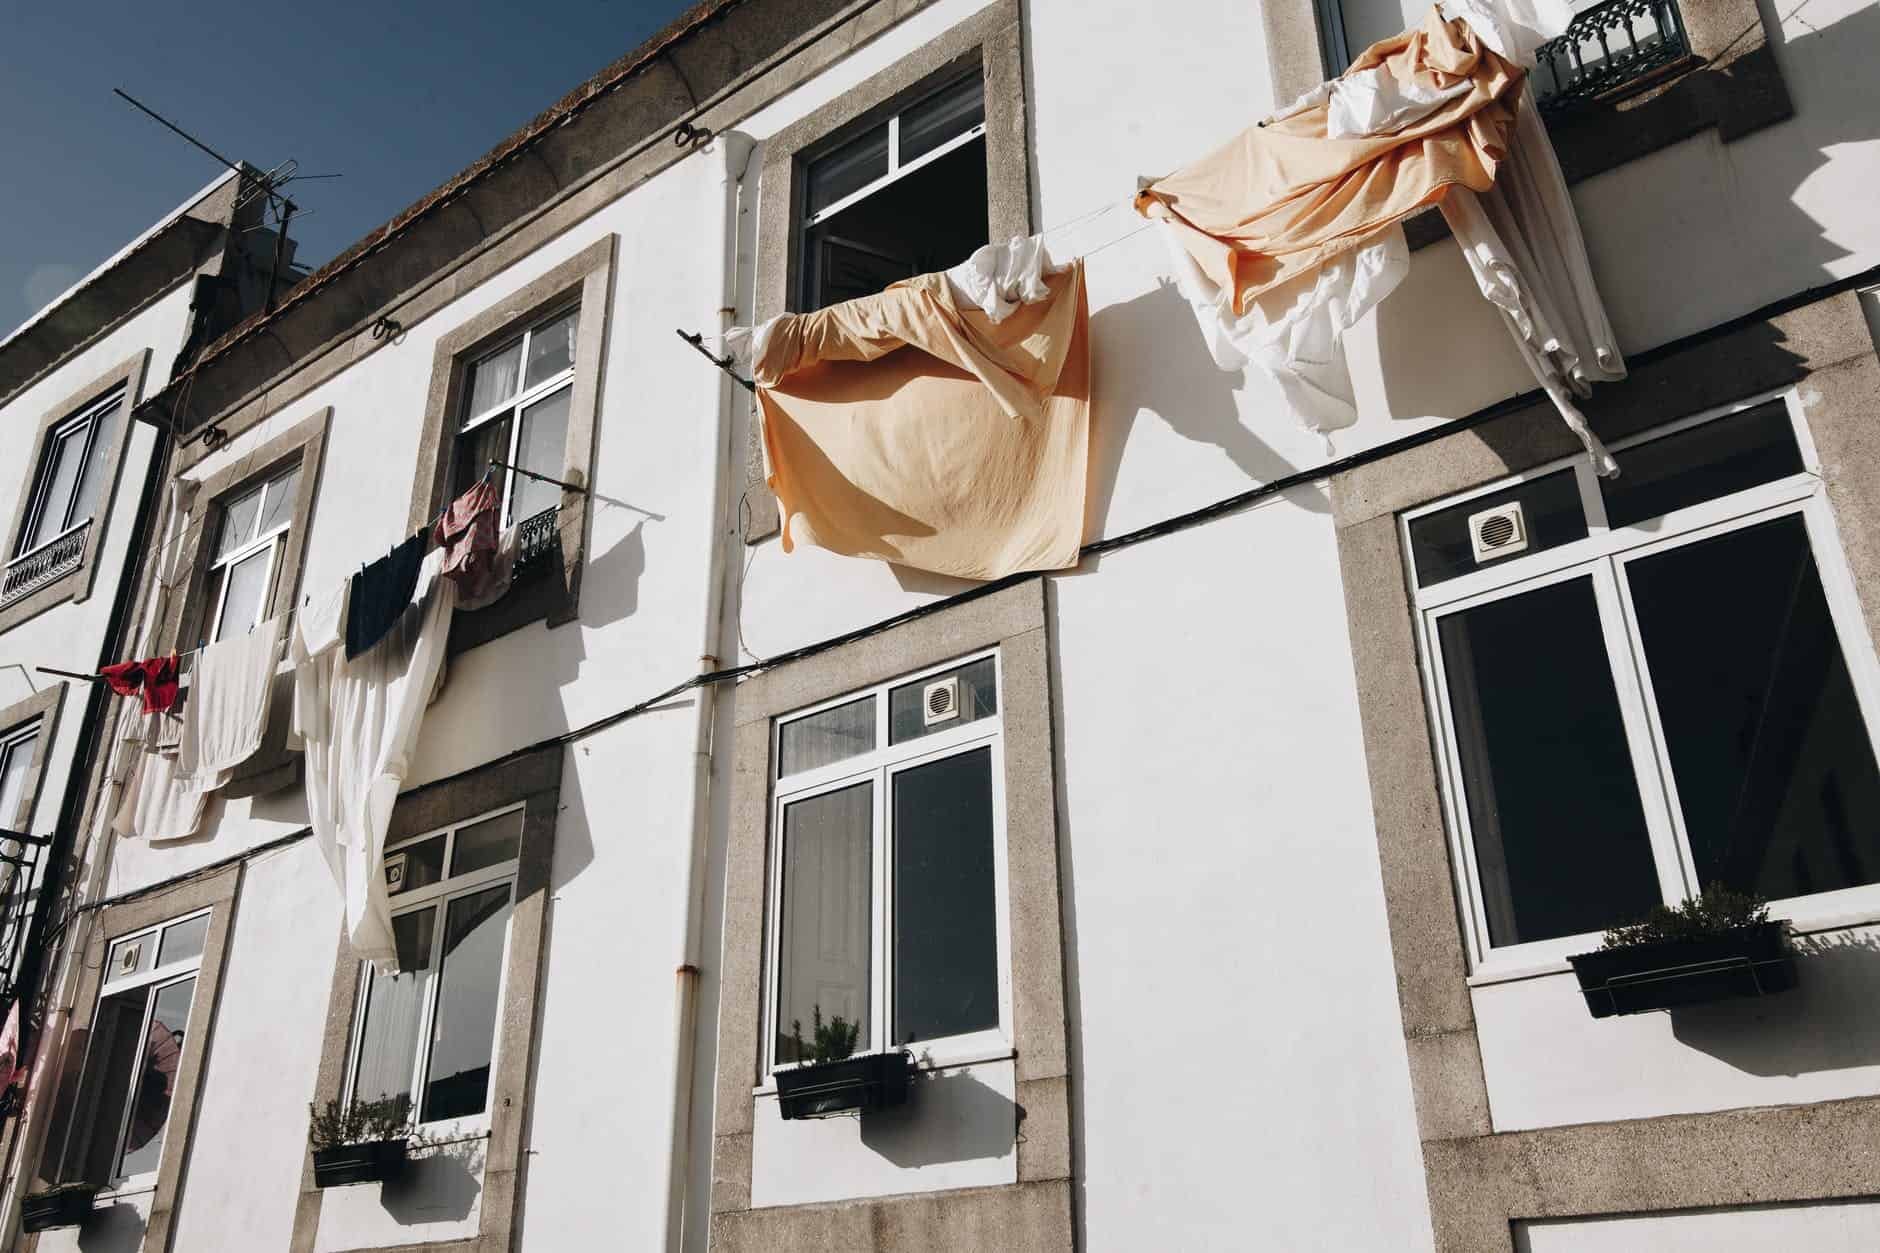 clothes hanged on wire beside house